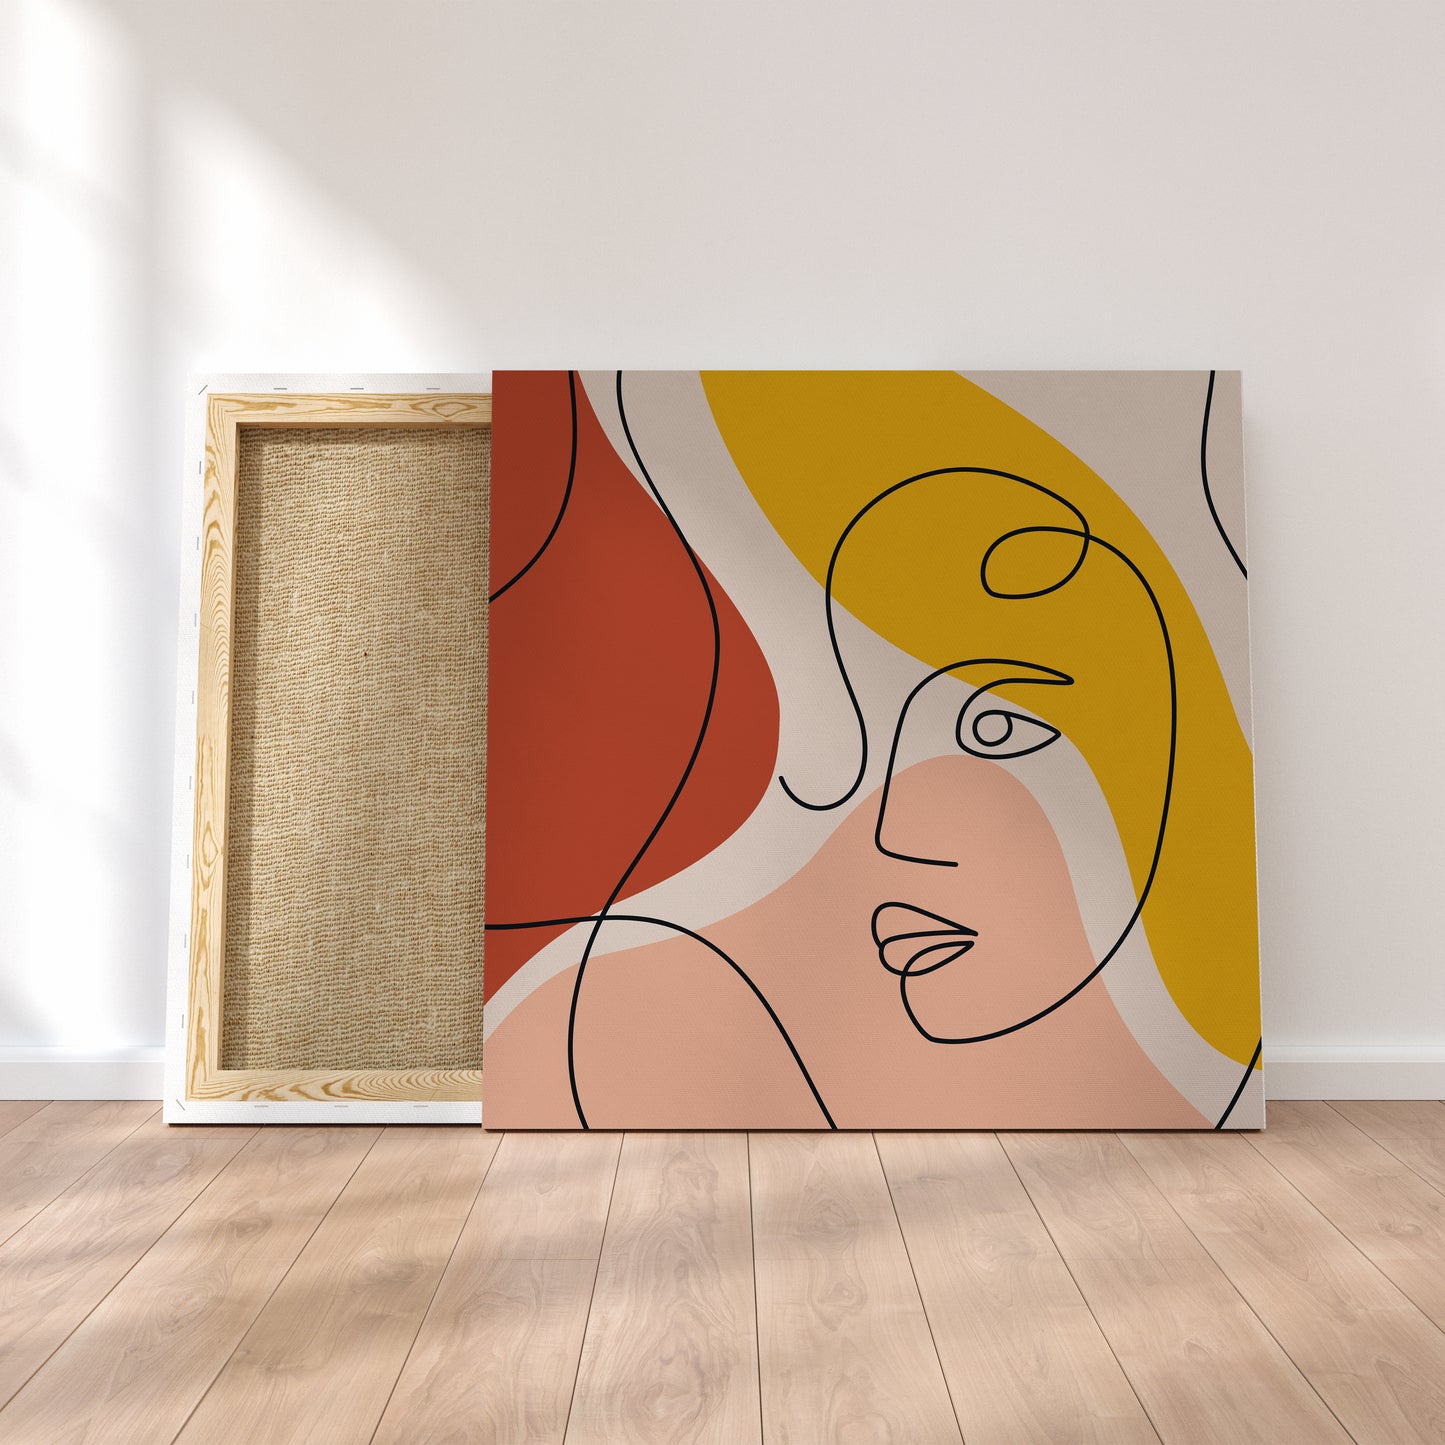 Set of 3 Squares Abstract Faces Canvas Print ArtLexy   